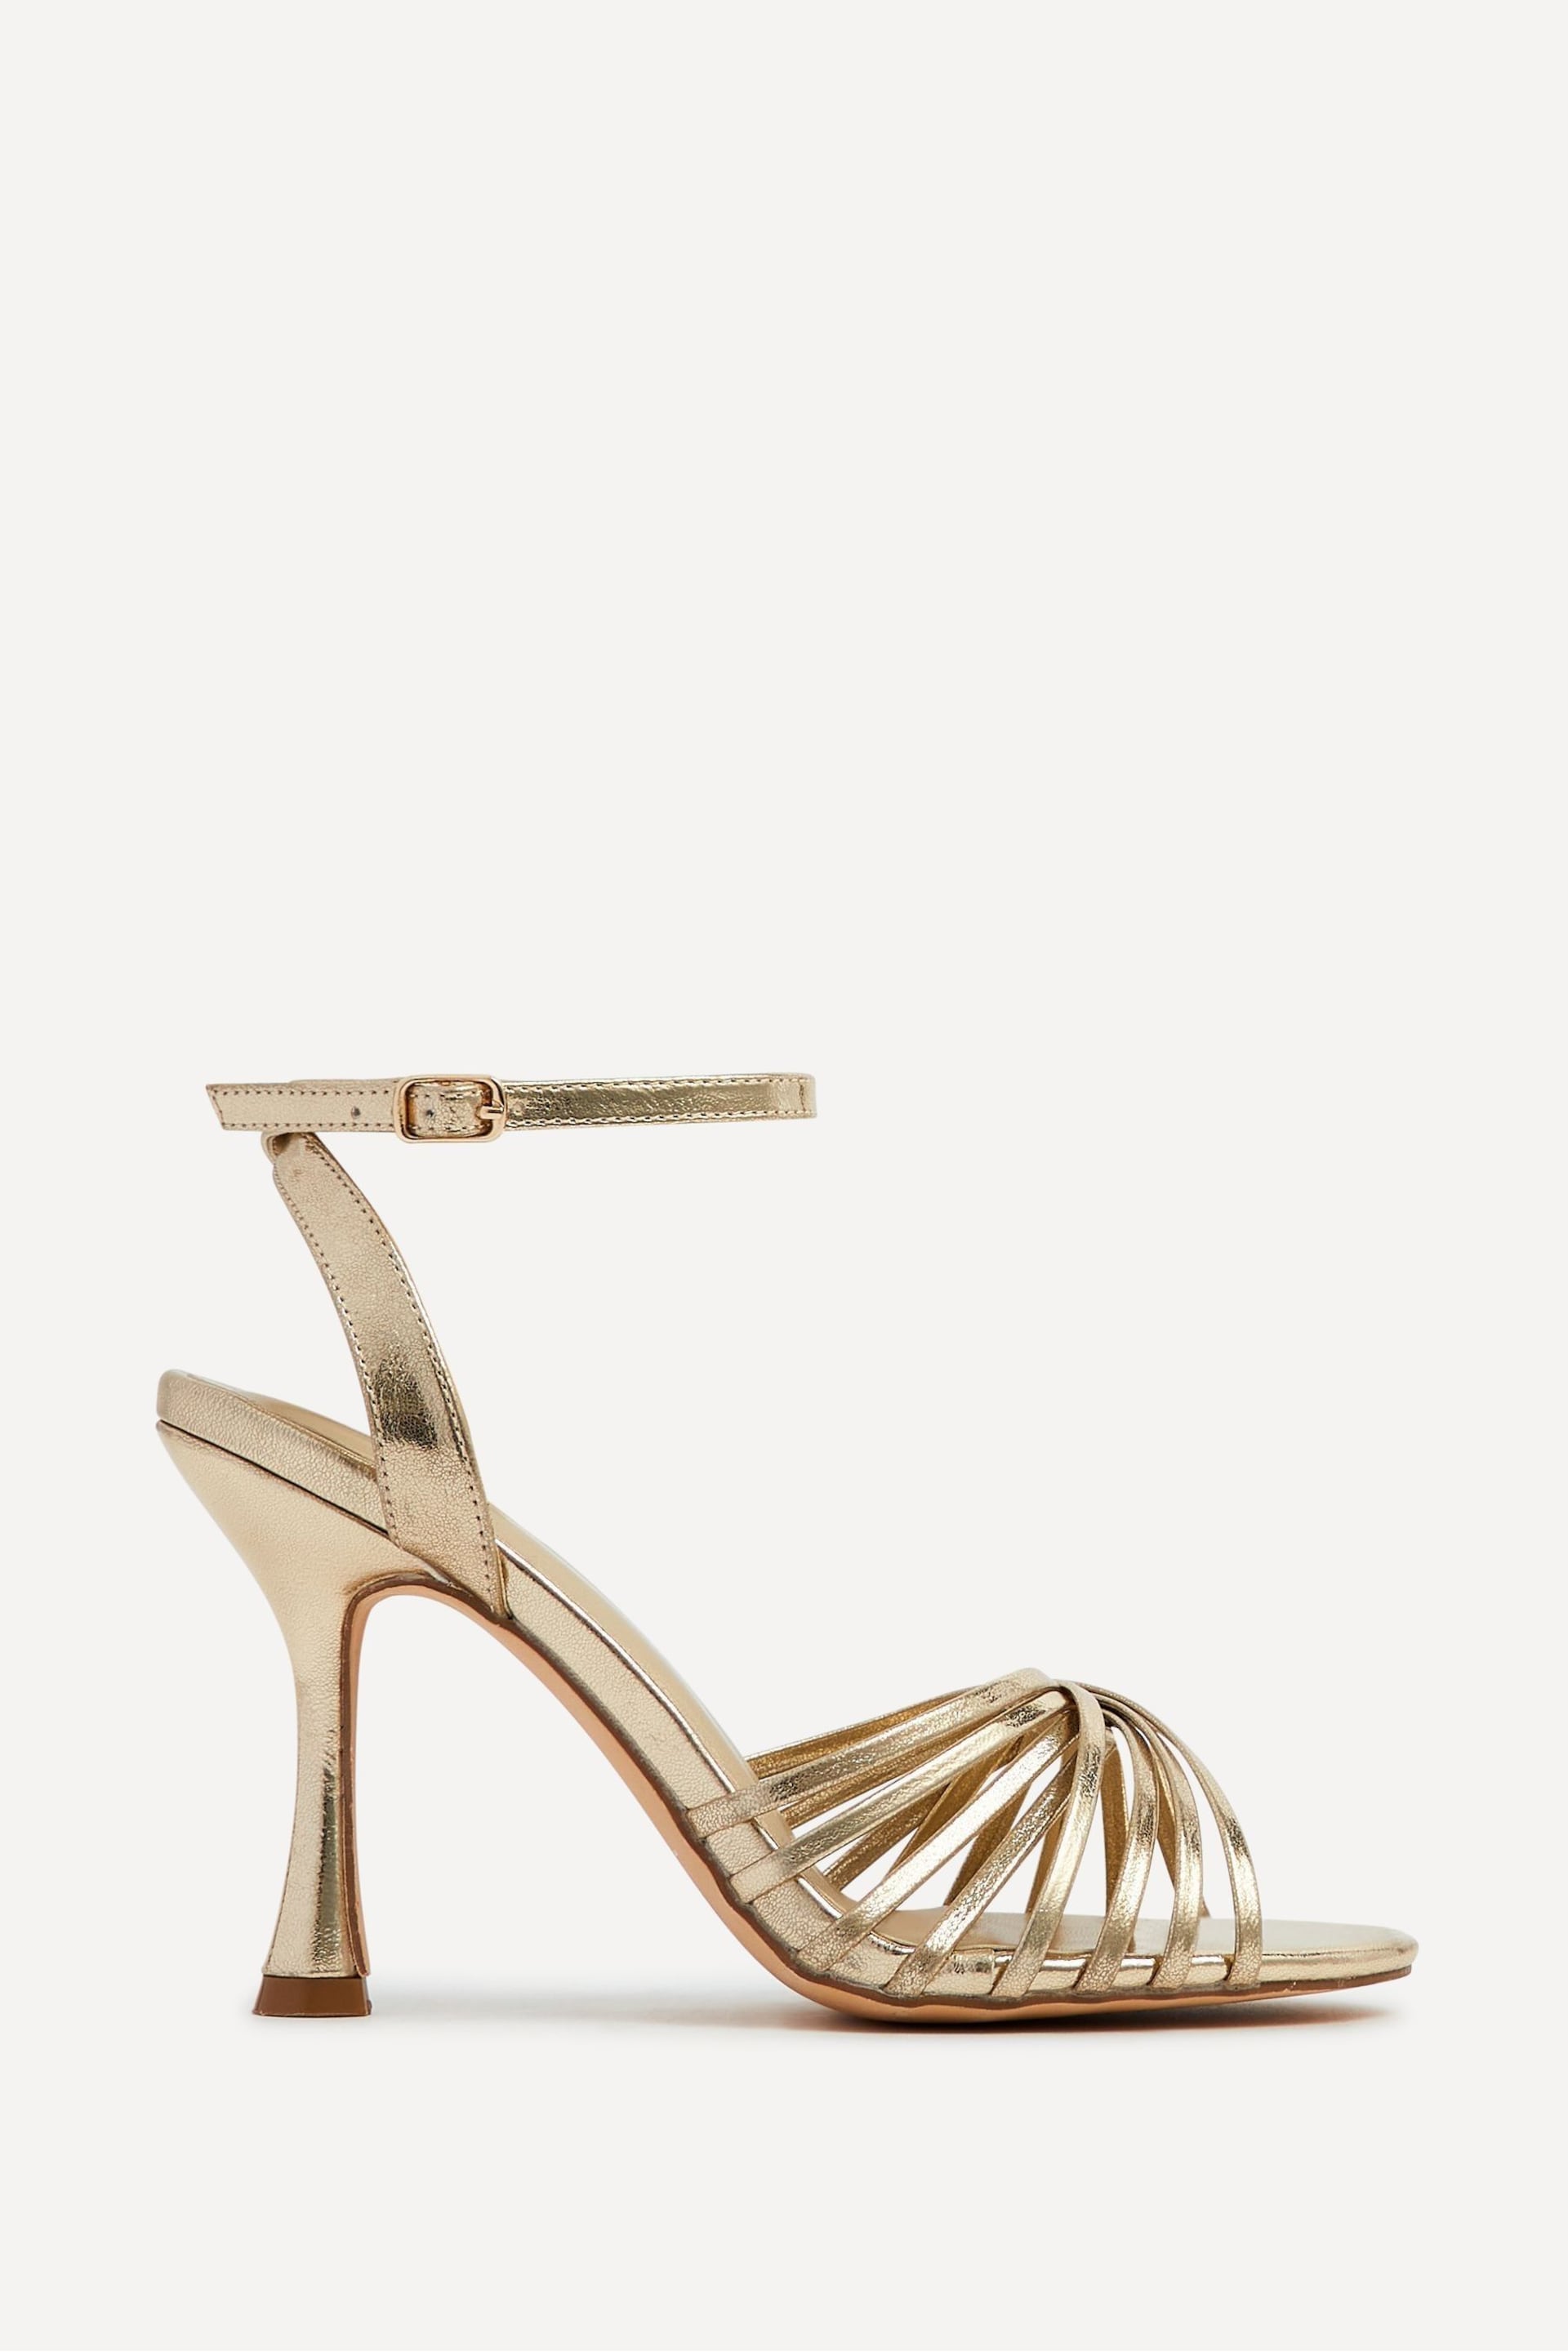 Linzi Gold Fleur Heeled Sandals With Flared Stiletto - Image 2 of 5